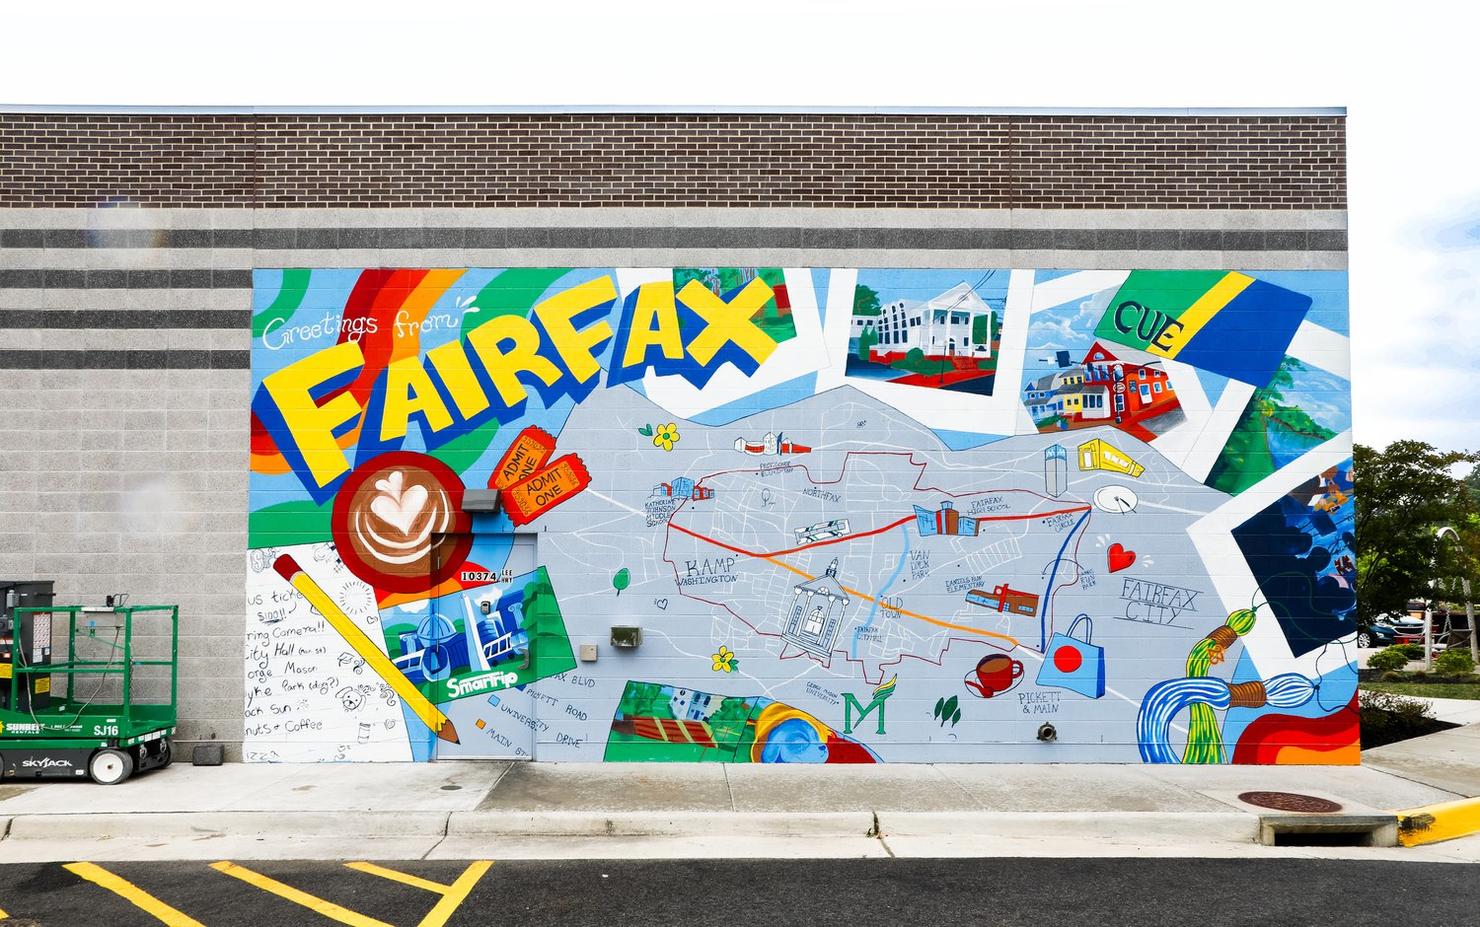 The 'Greetings from Fairfax' mural depicts a map of Fairfax City, with illustrations of important landmarks. The photo shows the mural on the exterior side wall of a restaurant